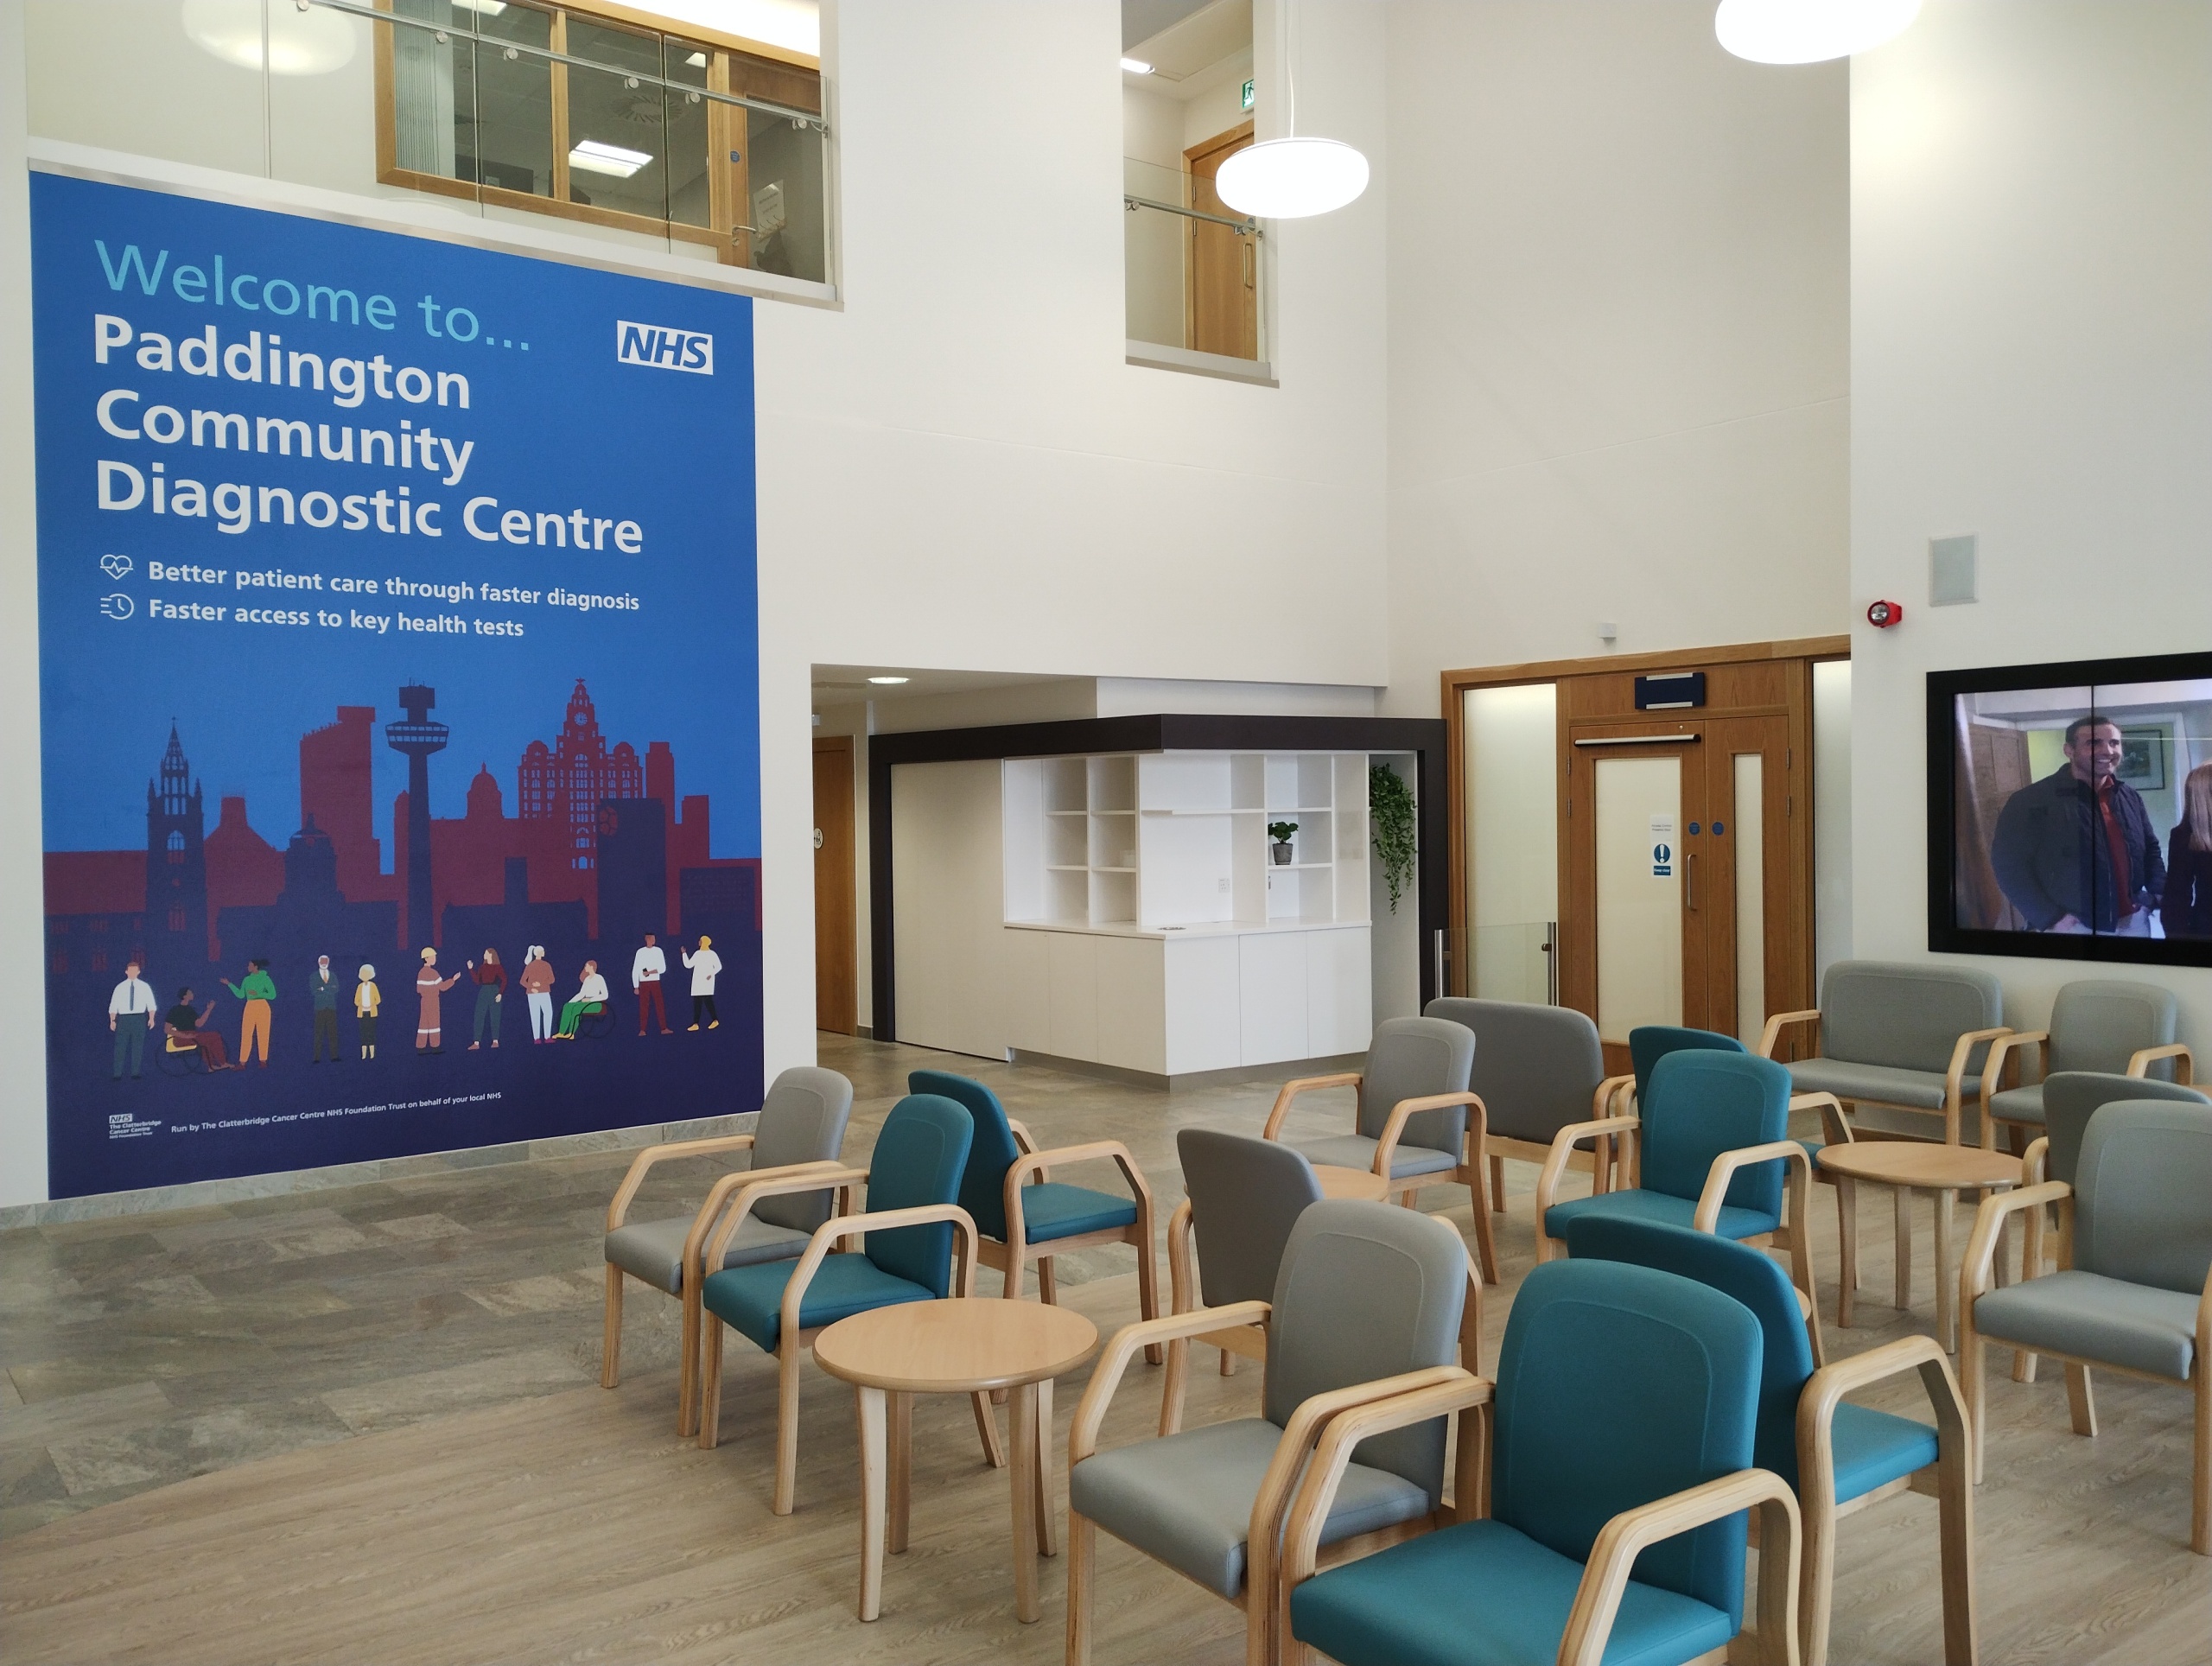 Picture of the reception and waiting area in the new diagnostic centre